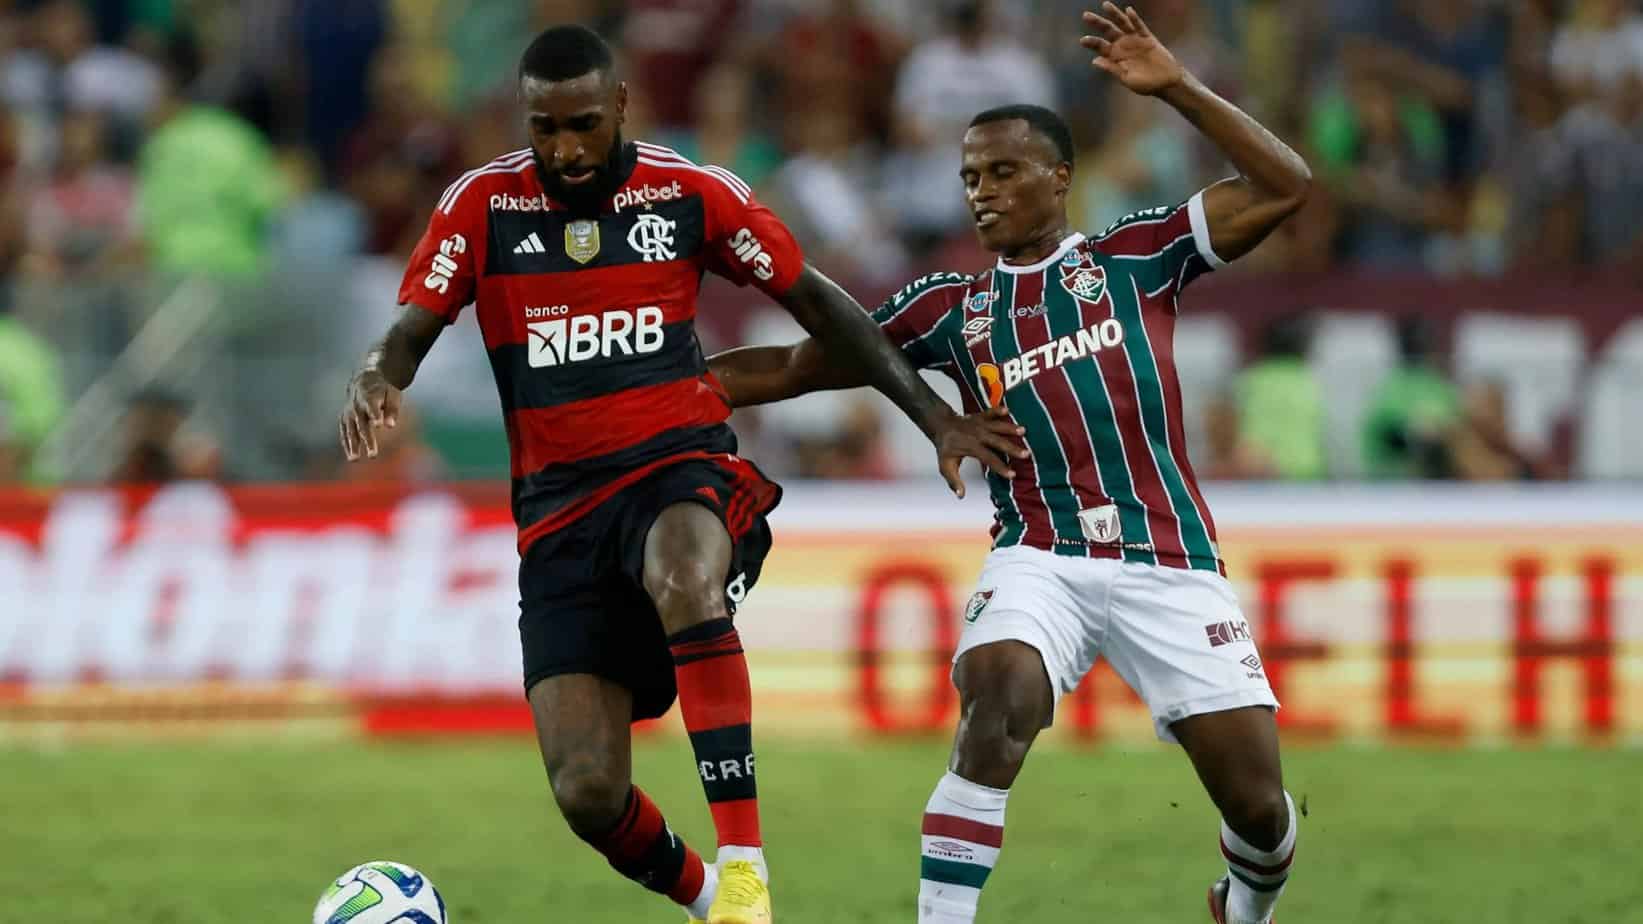 Flamengo vs. Fluminense Preview and Betting Odds